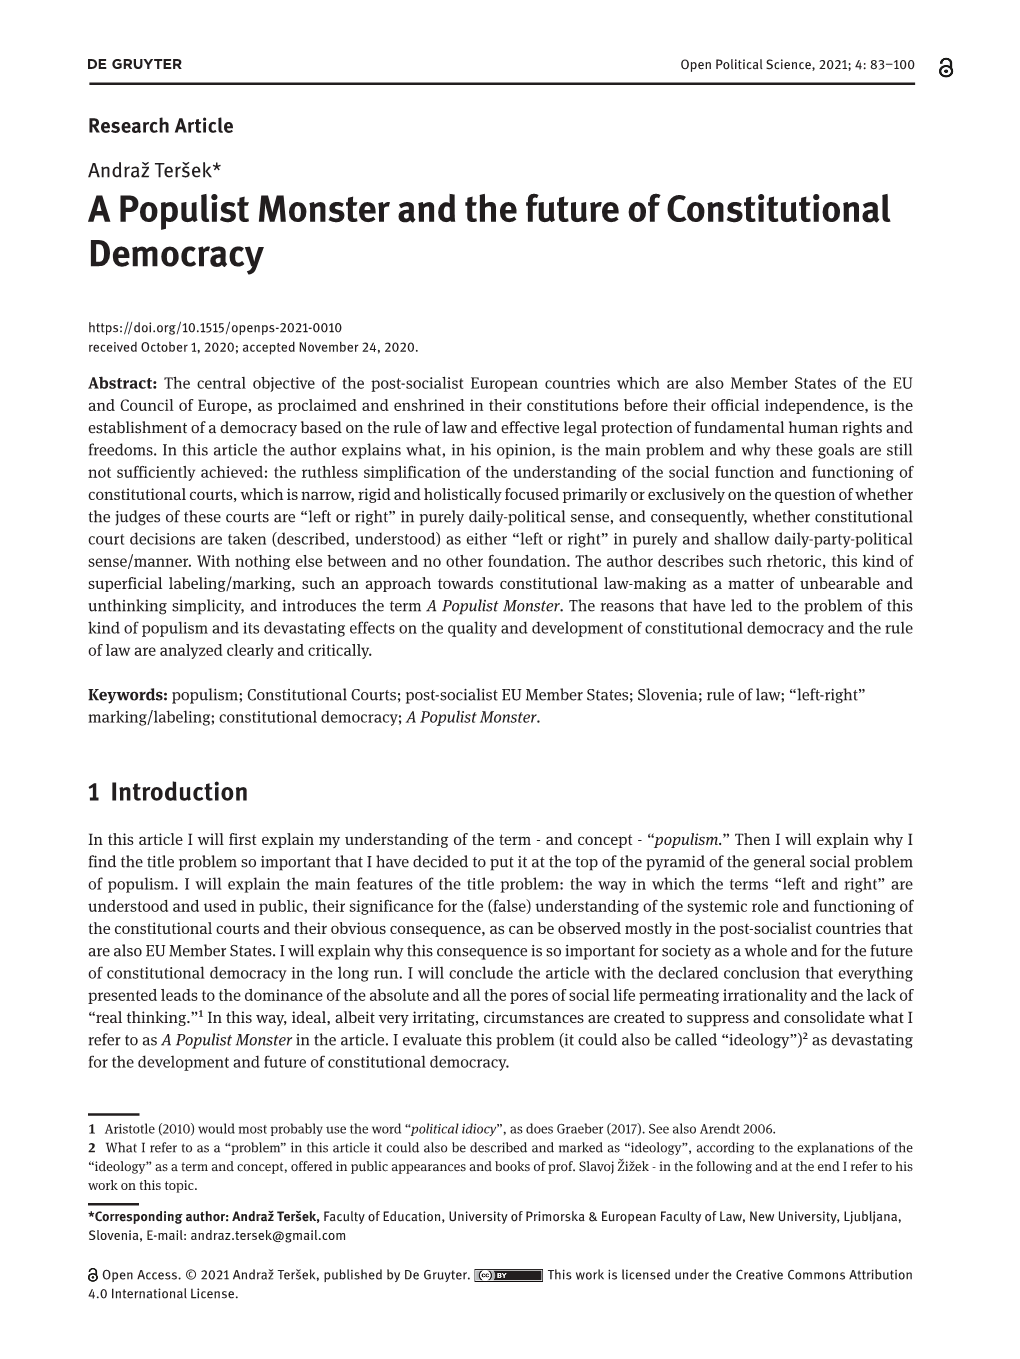 A Populist Monster and the Future of Constitutional Democracy